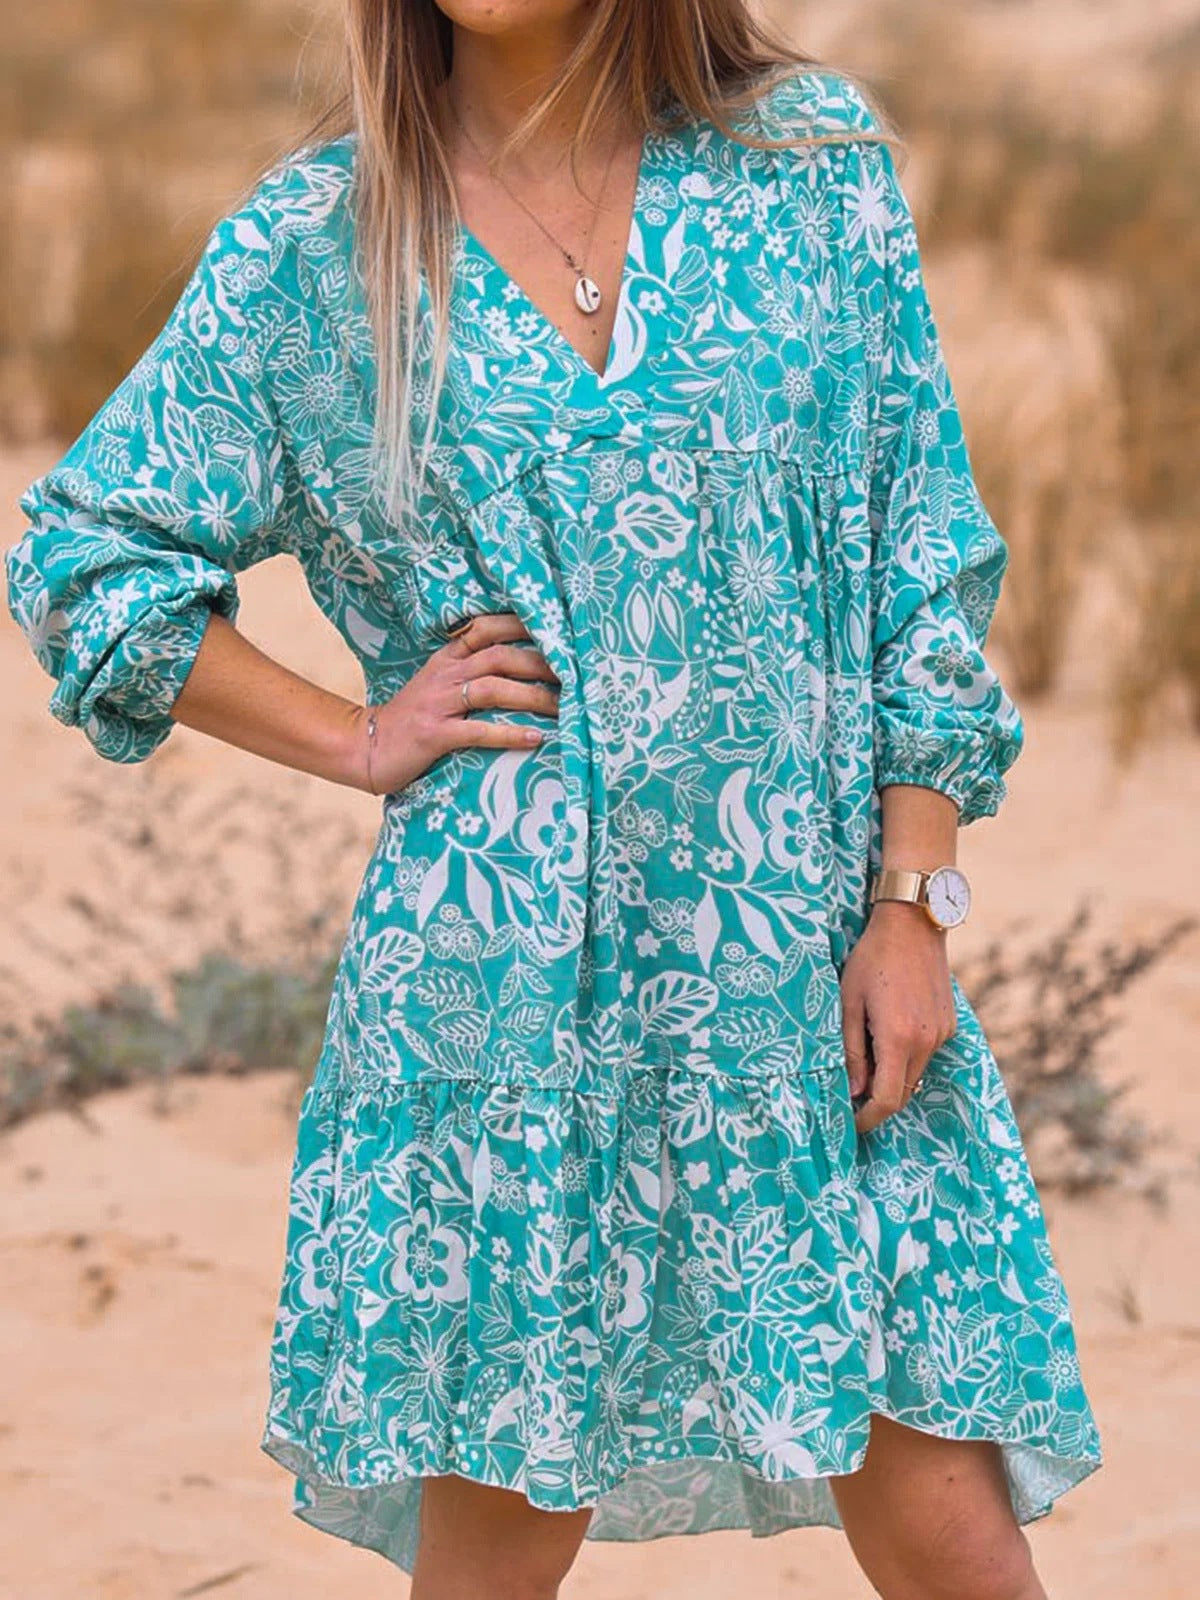 European And American Round Neck Long Sleeve Printed Dress